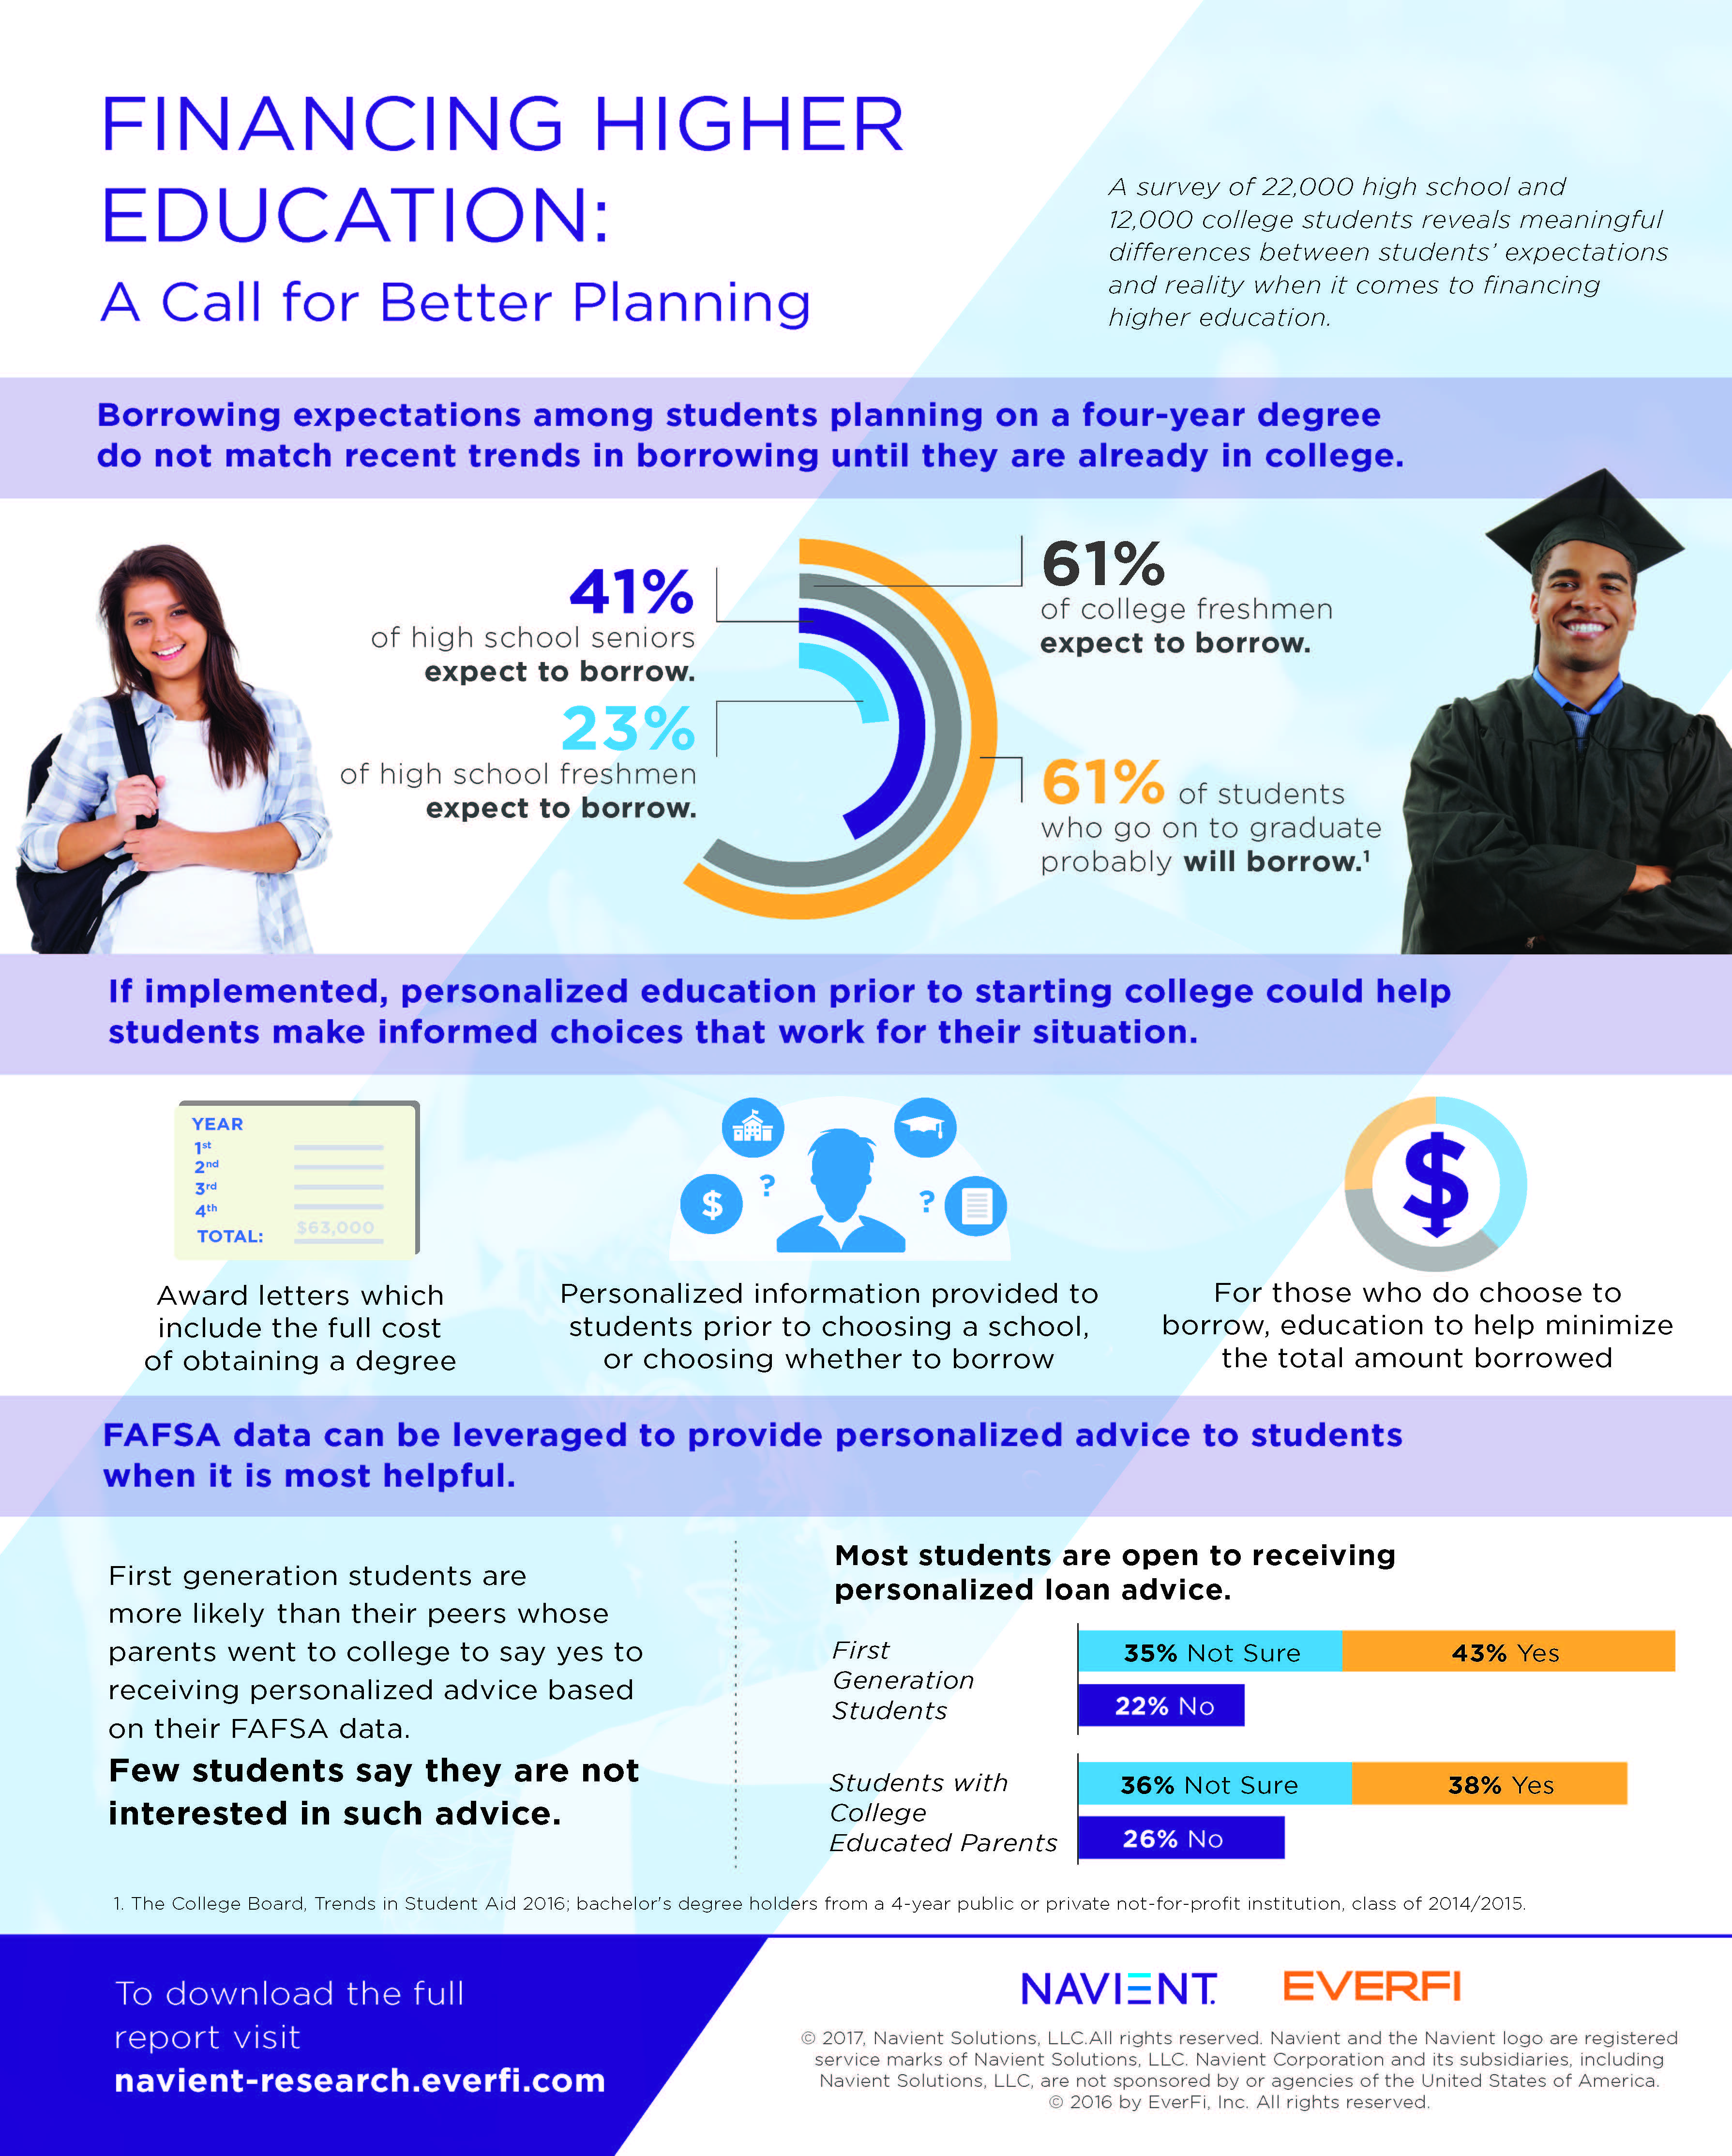 Infographic: A Call for Better Planning